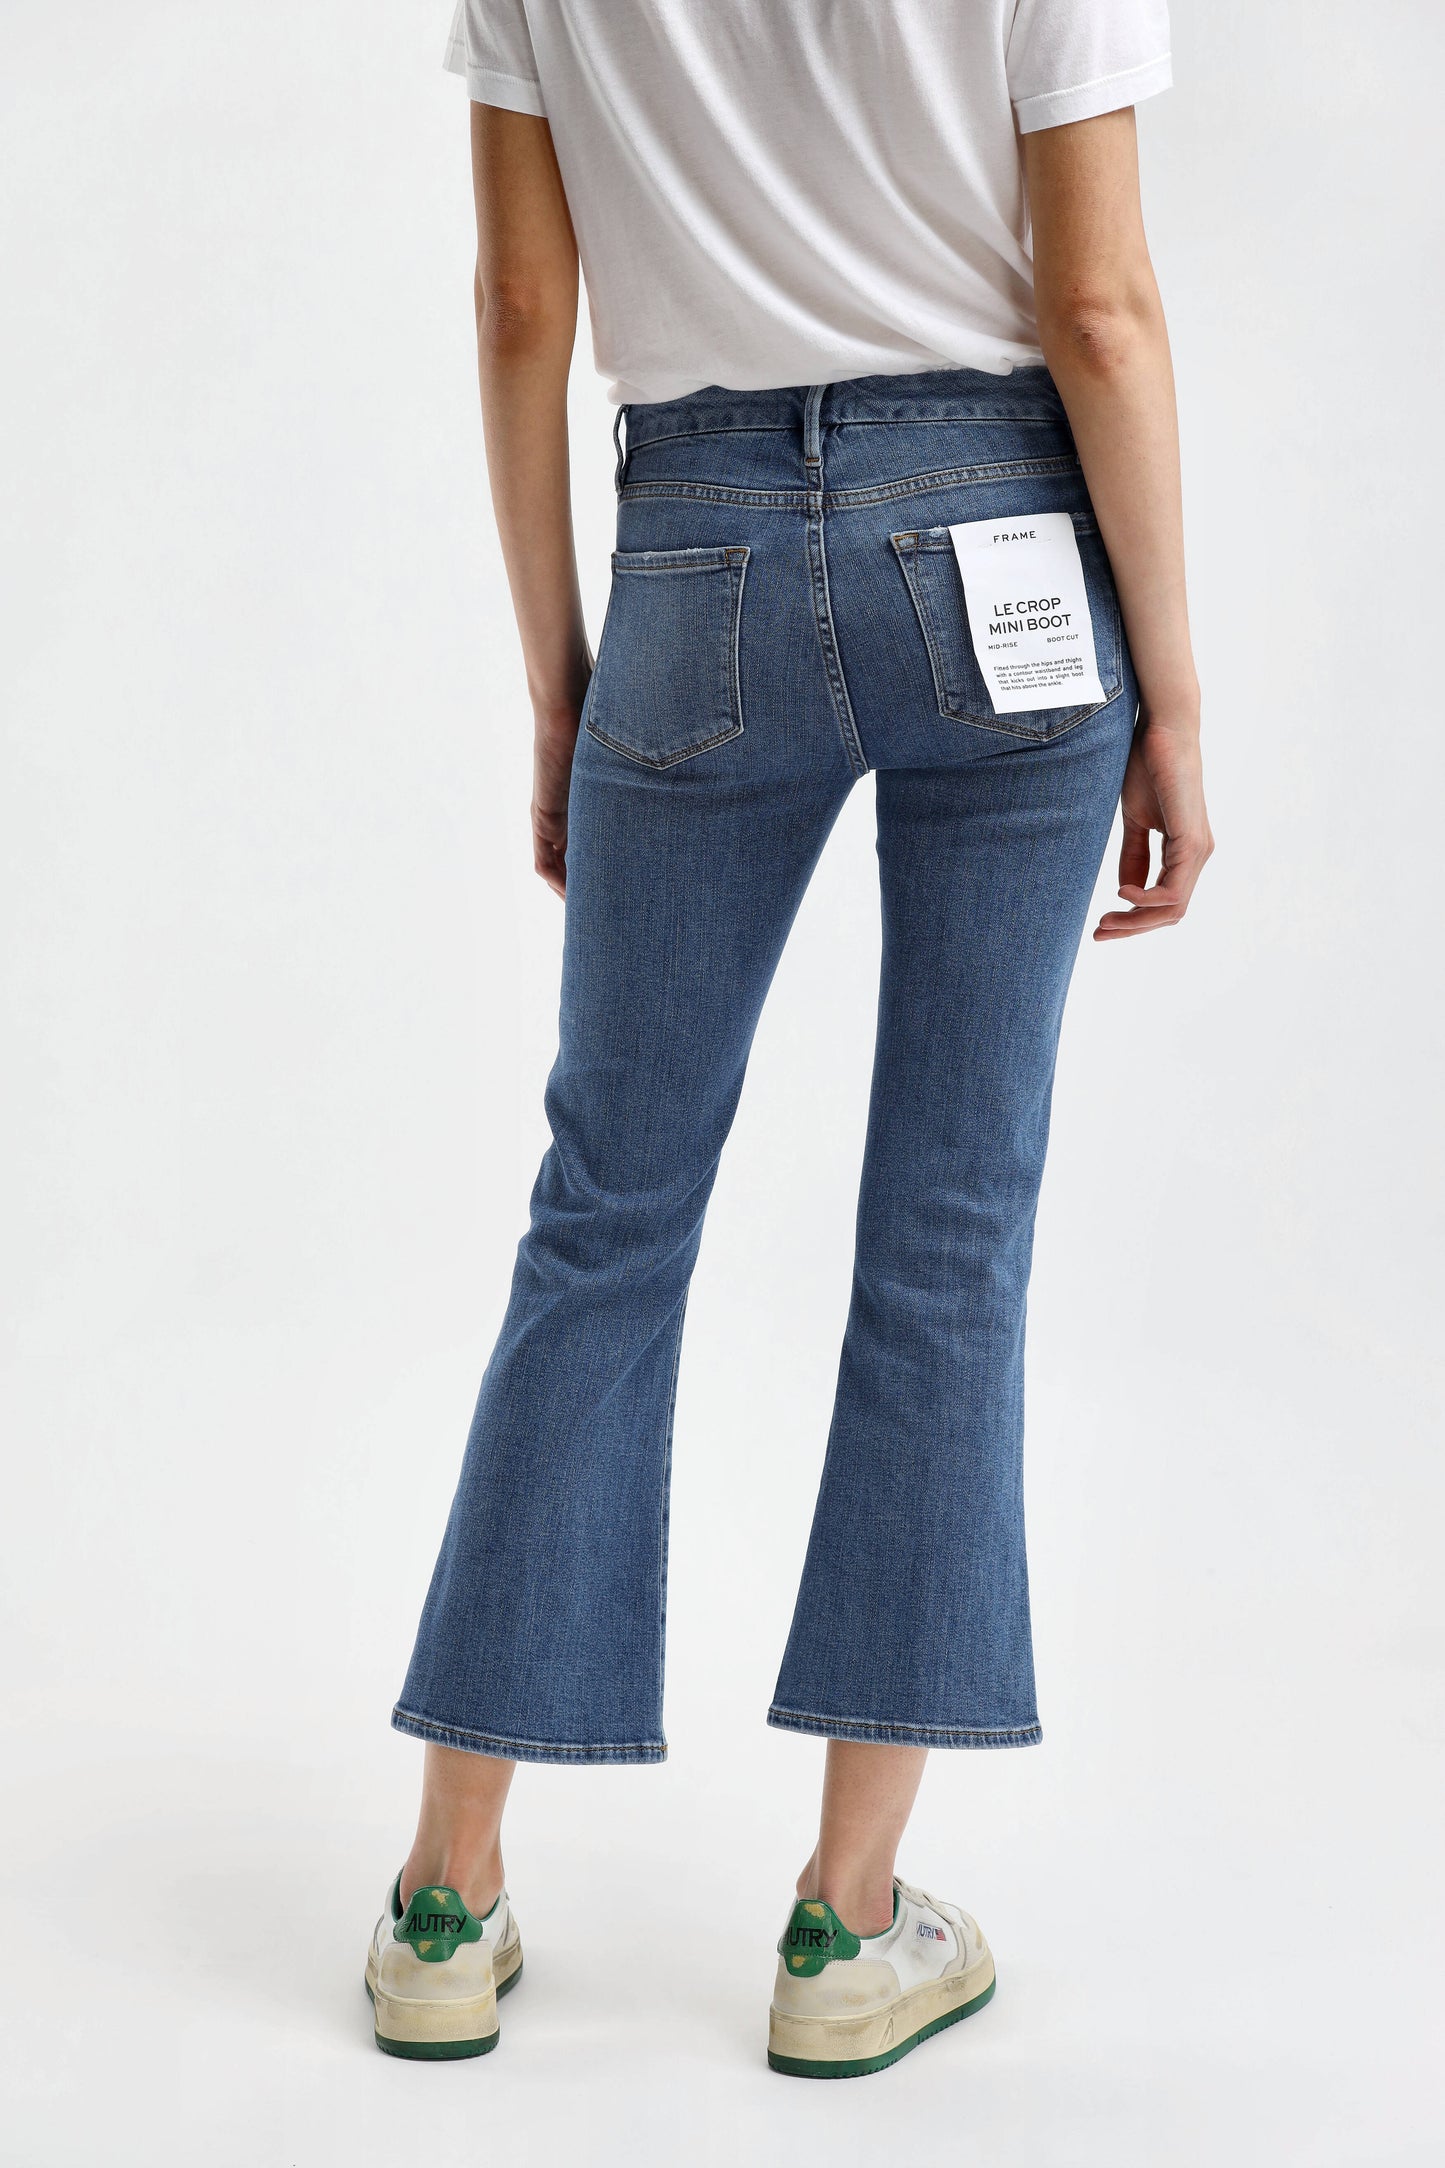 Jeans Le Crop Mini Boot in SamsonFrame - Anita Hass